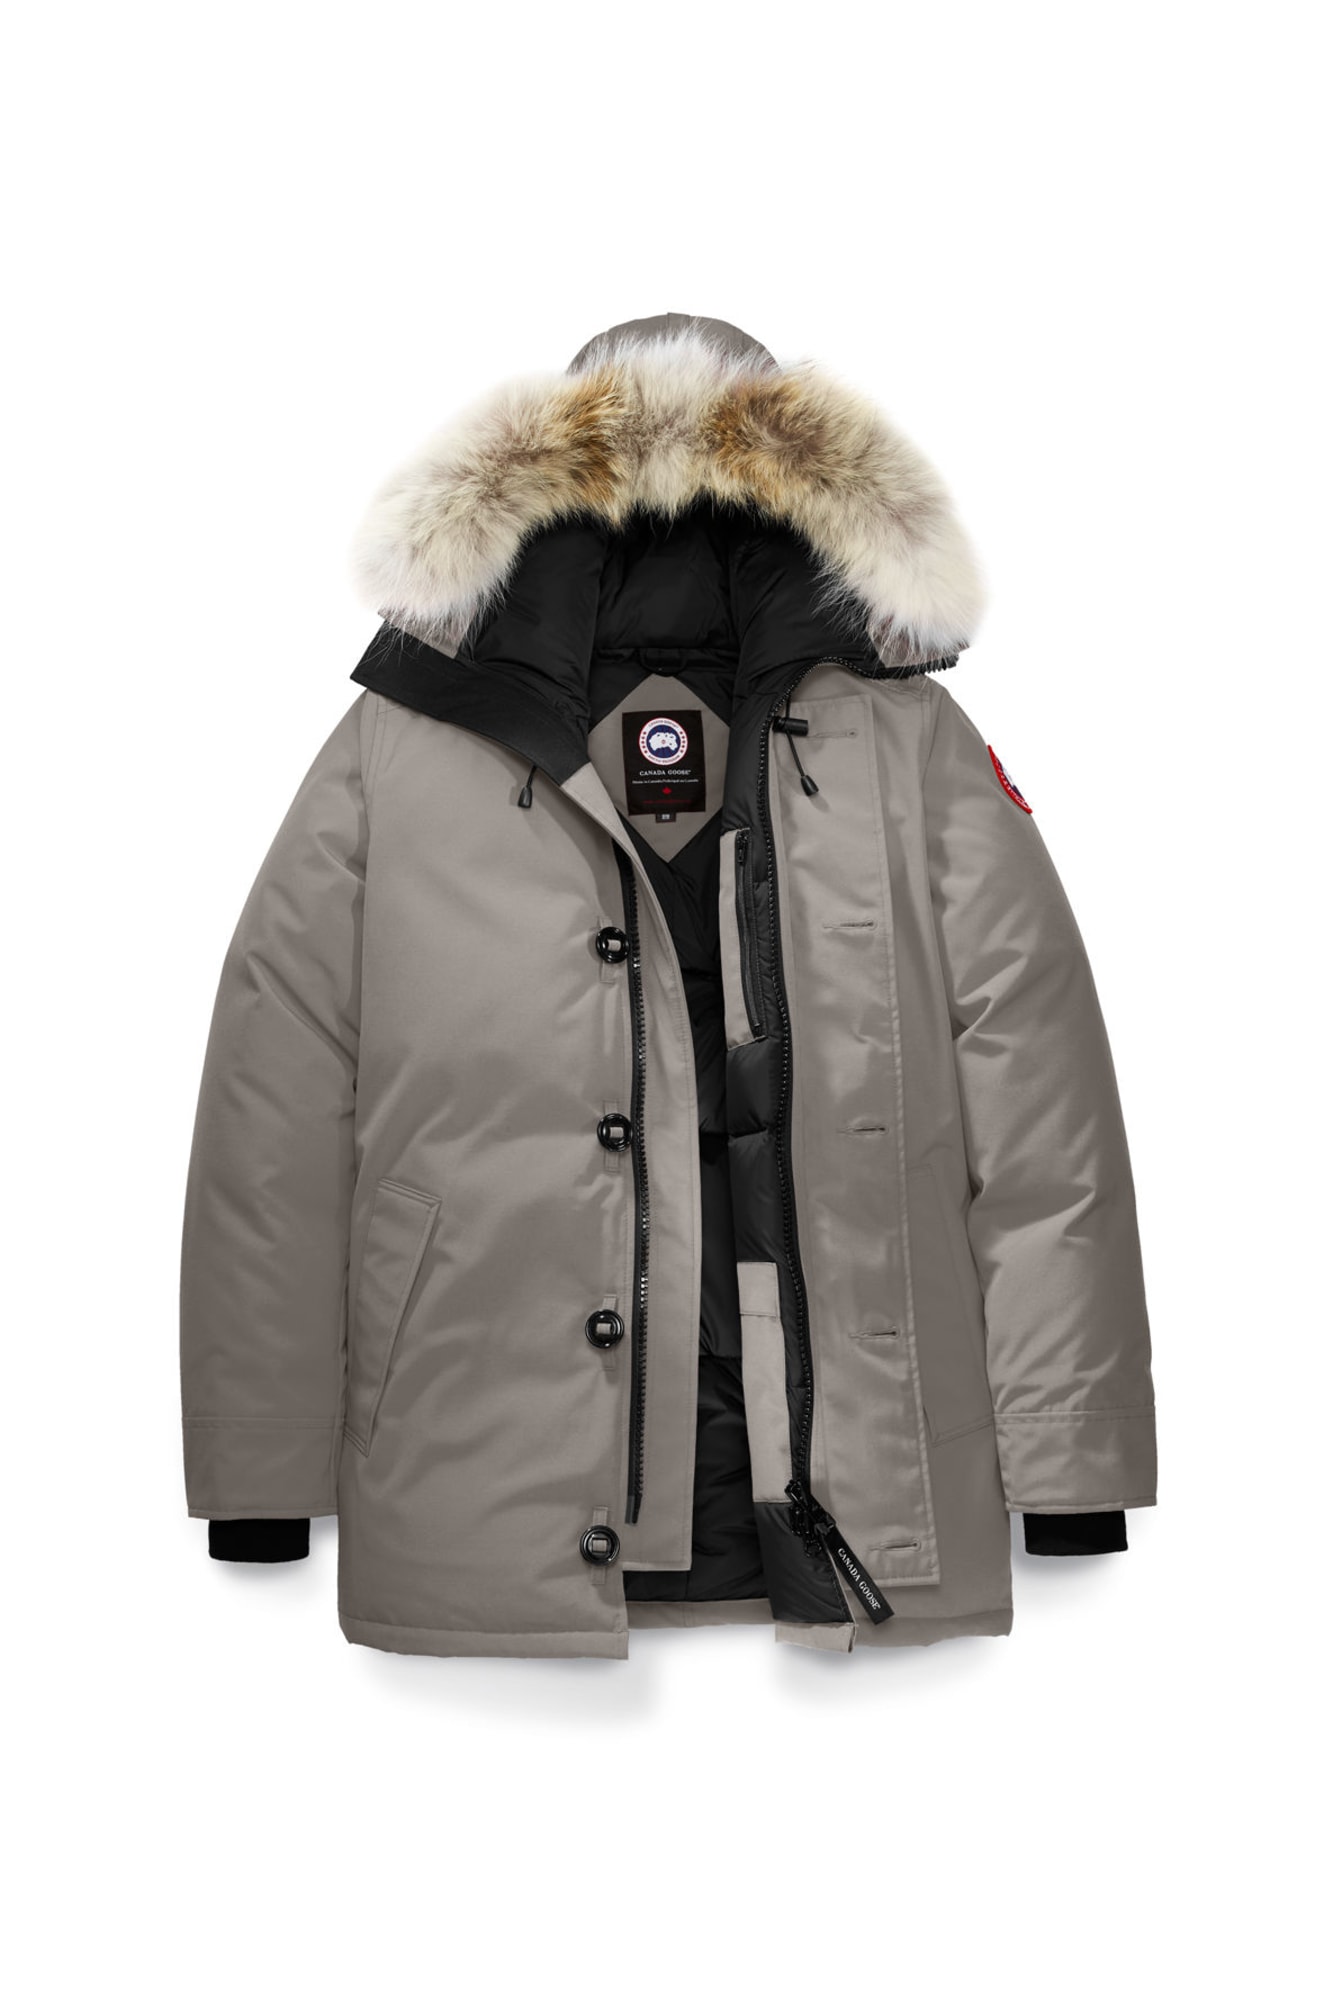 Canada Goose Fur Replacement Cost Chateau Parka Men Canada Goose